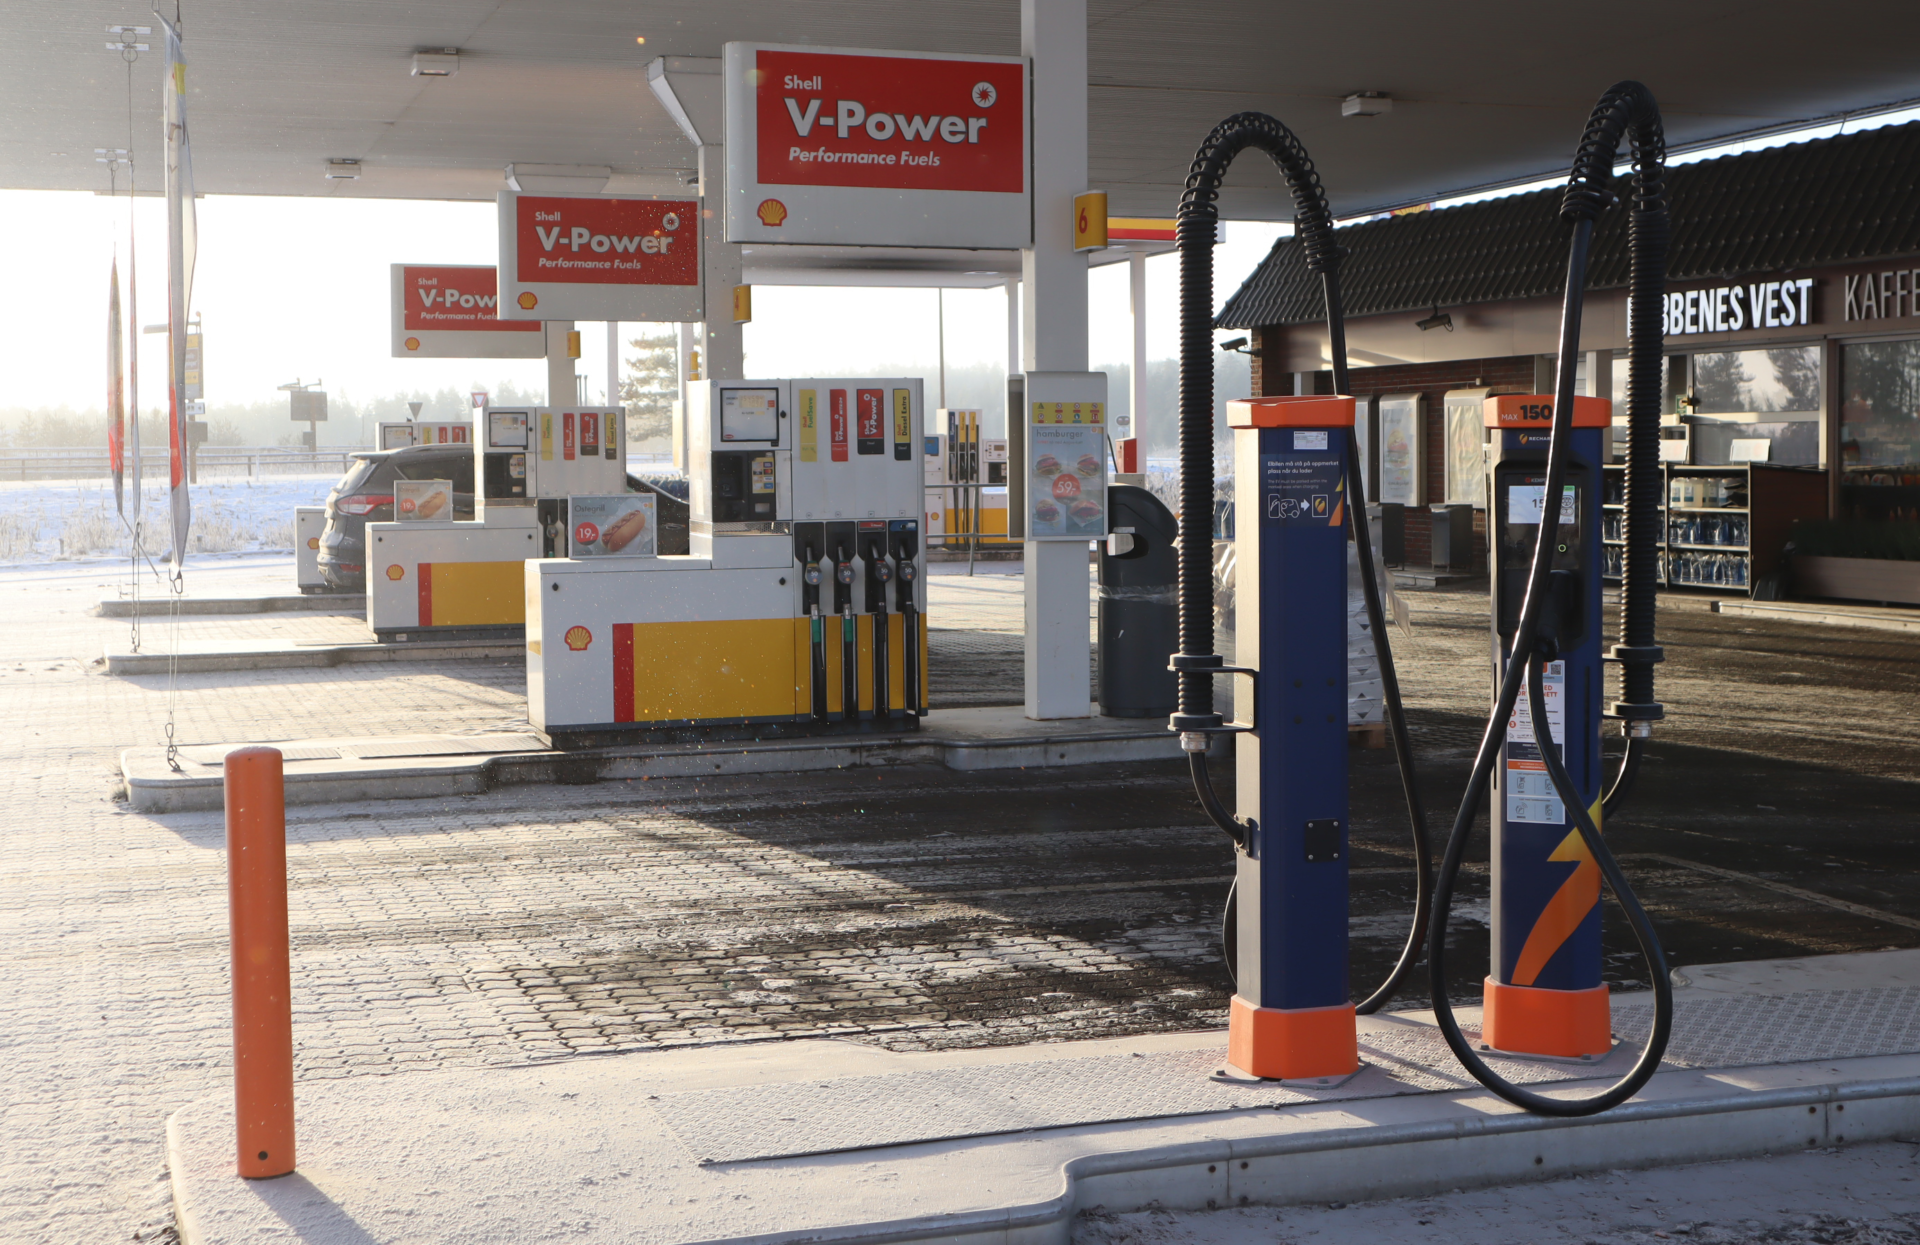 An empty petrol station on a sunny day with light snow cover, advertising Kempower EV charging solutions, with a small café sign in the background.